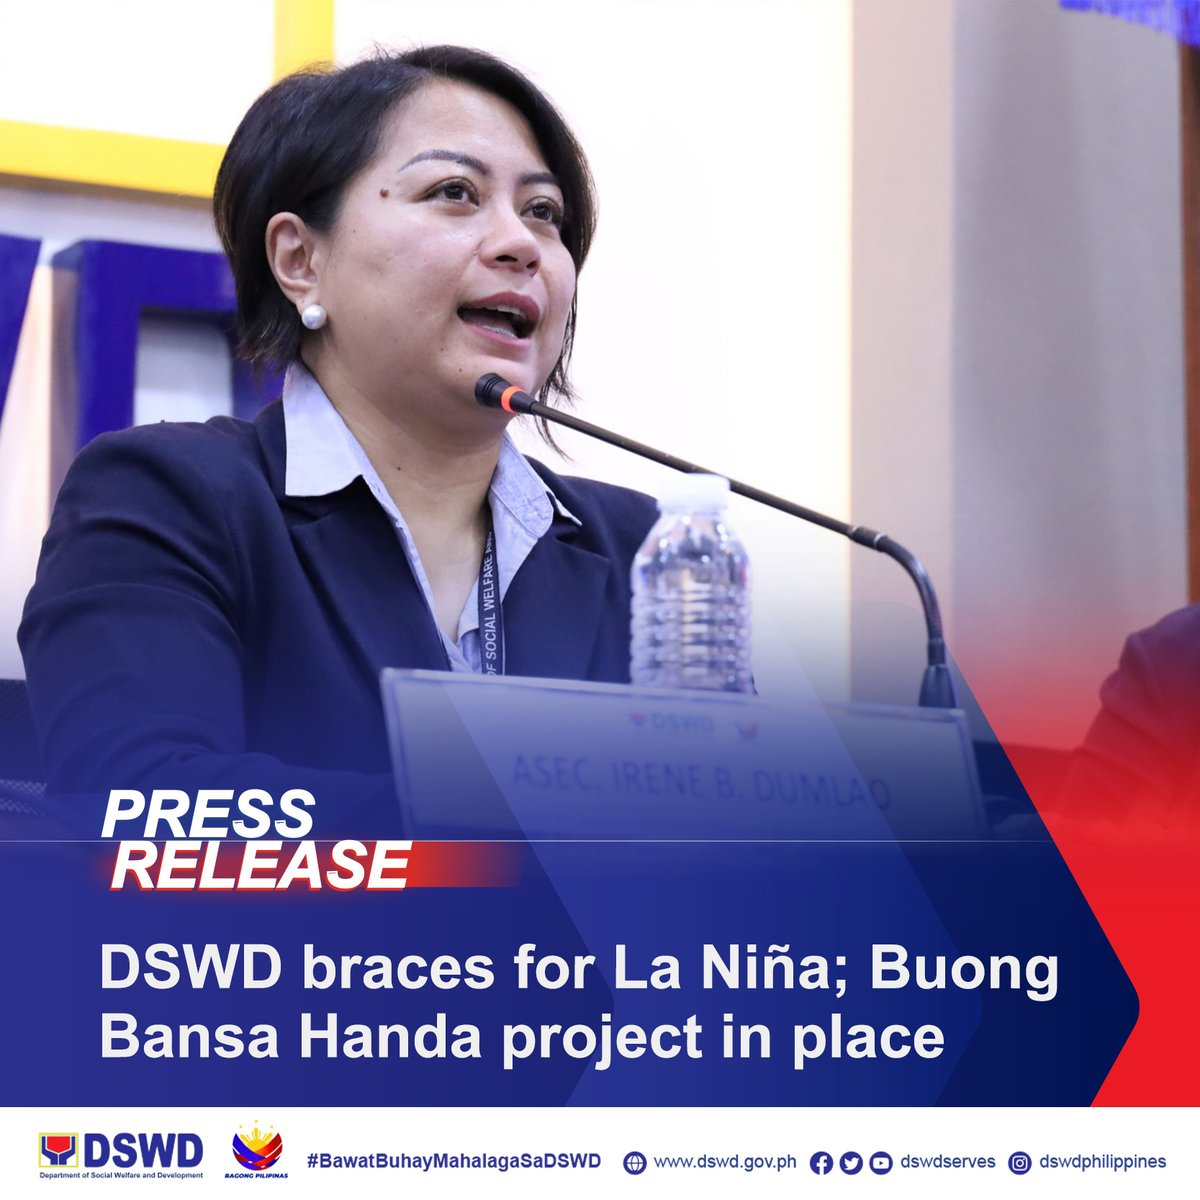 𝗗𝗦𝗪𝗗 𝗣𝗥𝗘𝗦𝗦 𝗥𝗘𝗟𝗘𝗔𝗦𝗘: DSWD braces for La Niña; Buong Bansa Handa project in place The Department of Social Welfare and Development (DSWD) is now preparing for the onset of the La Niña phenomenon, which is expected to happen this June, by ensuring that its disaster…